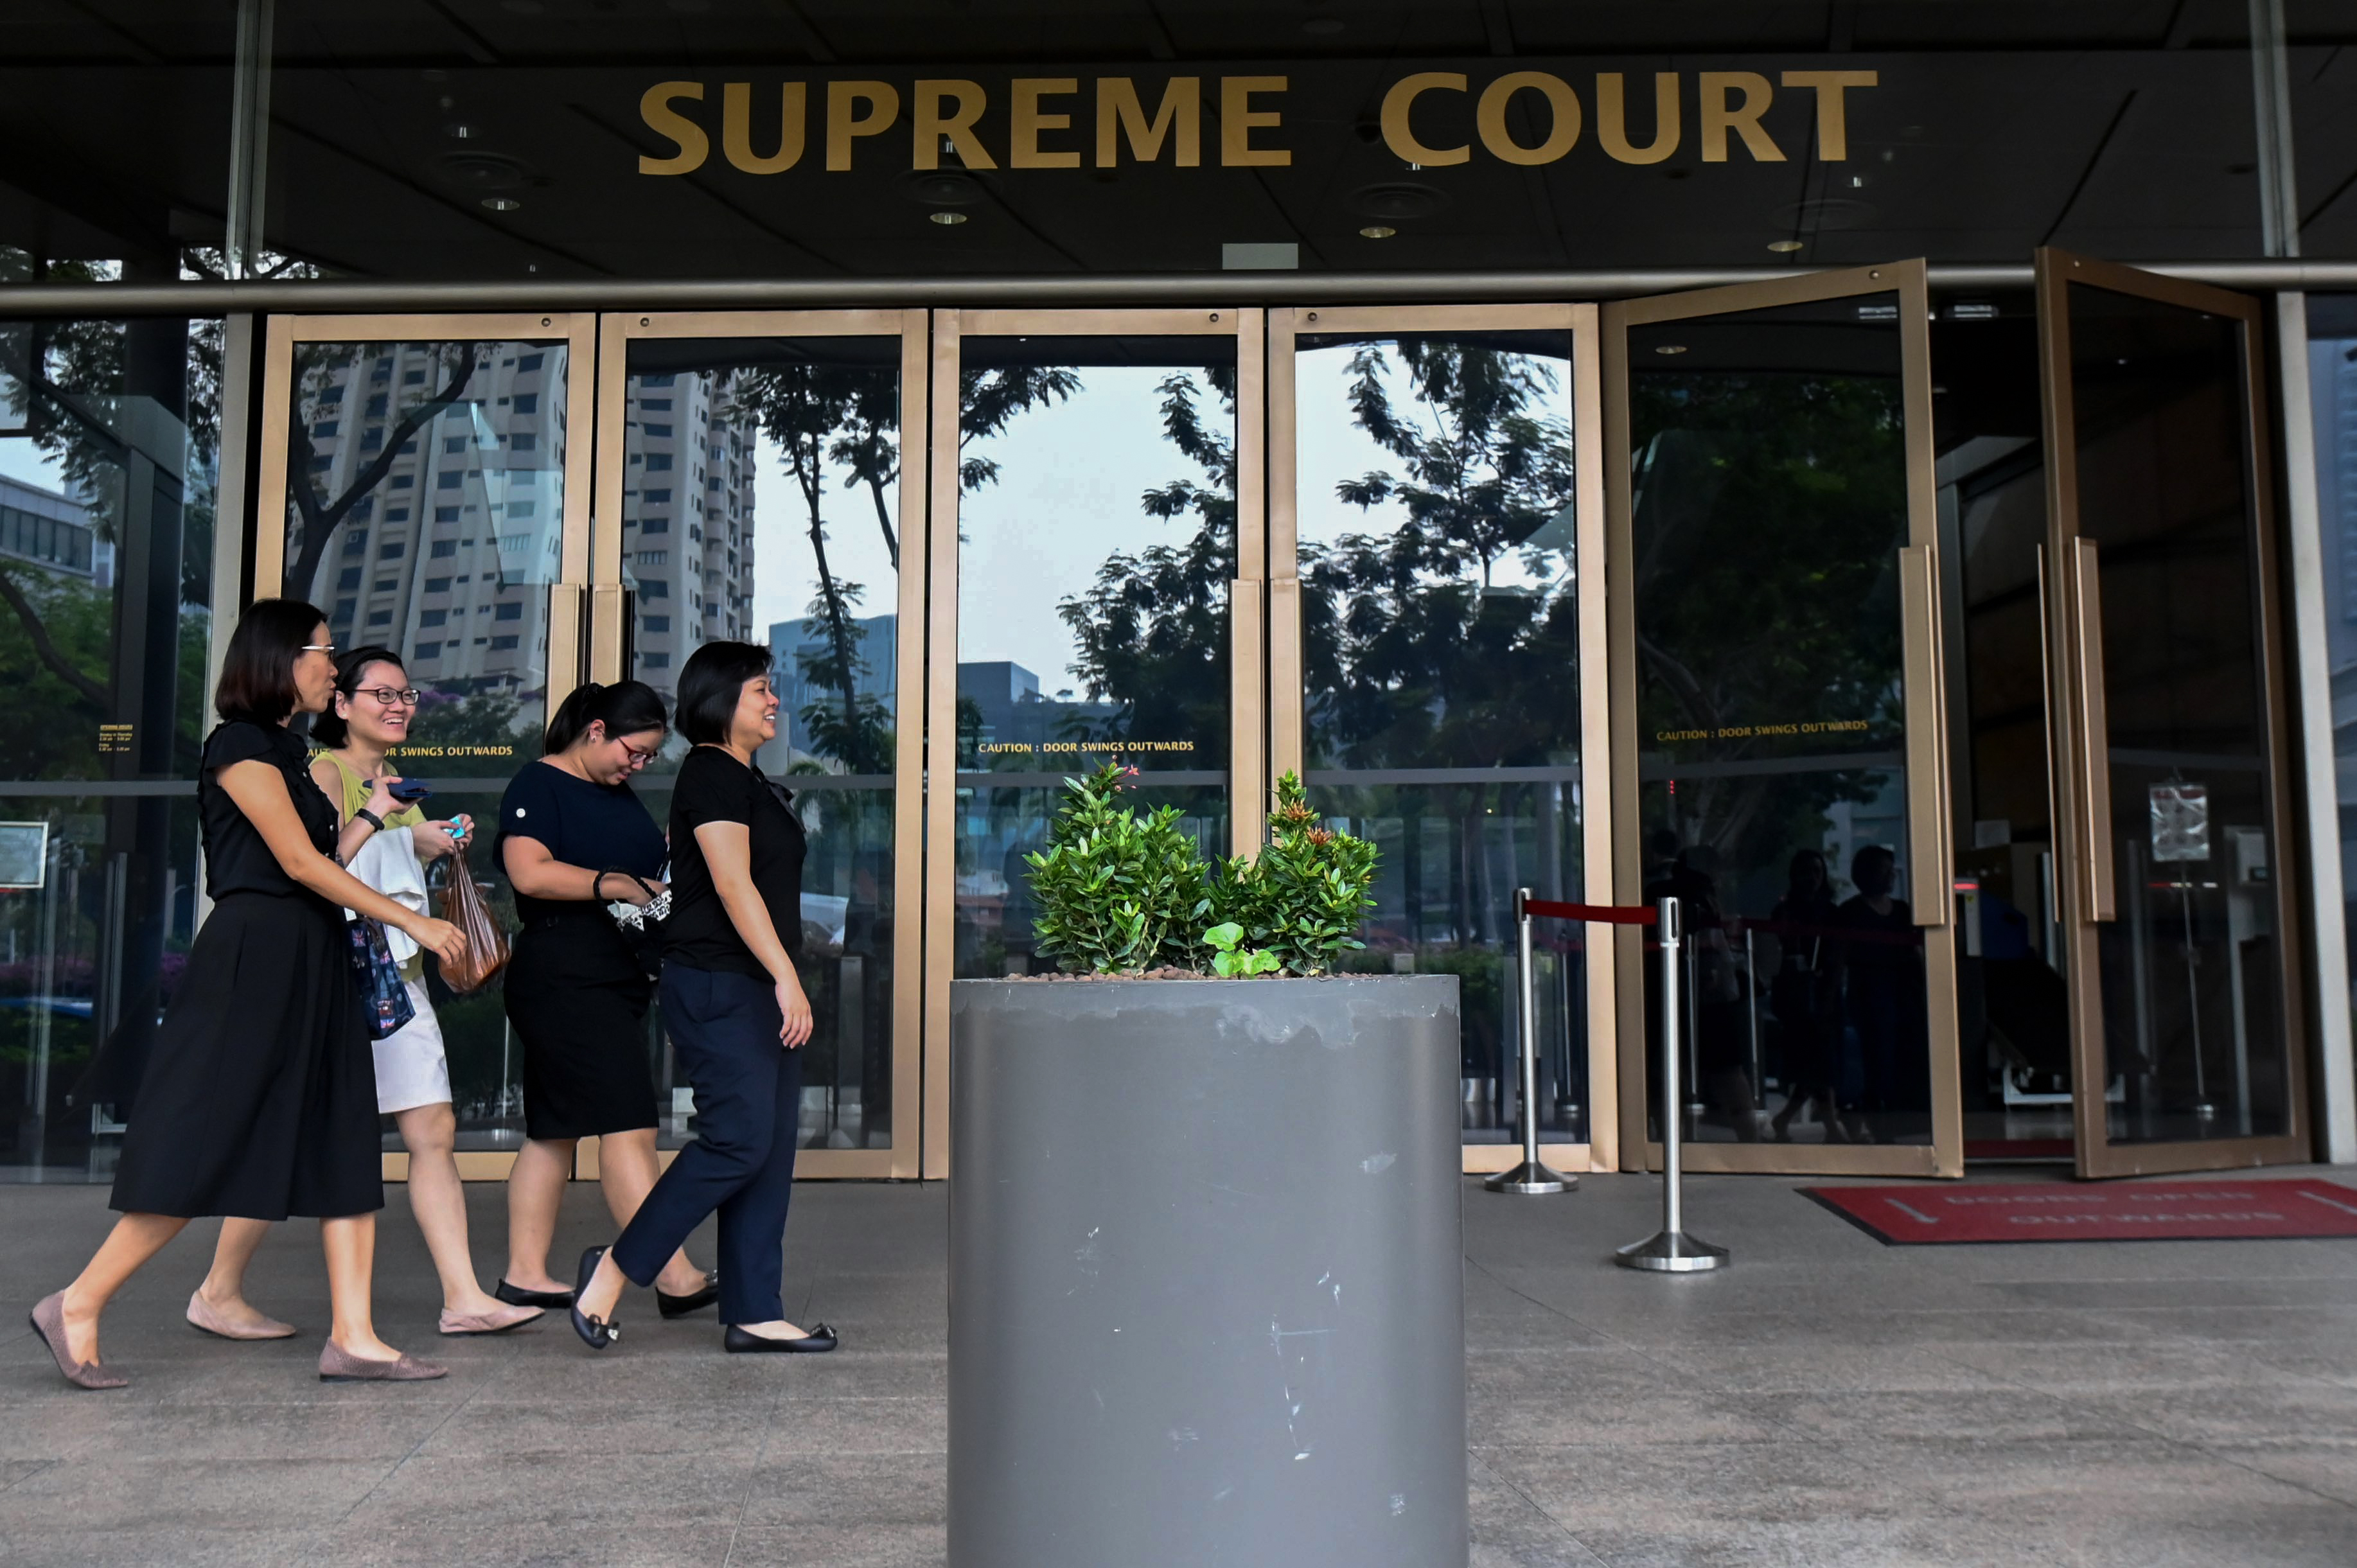 People walk past the Supreme Court entrance in Singapore on November 13, 2019. - A Singaporean court on November 13 began hearing new challenges against a law banning sex between men, the latest bid to overturn the statute and score another victory for rights in Asia. (Photo by Roslan RAHMAN / AFP) (Photo by ROSLAN RAHMAN/AFP via Getty Images)